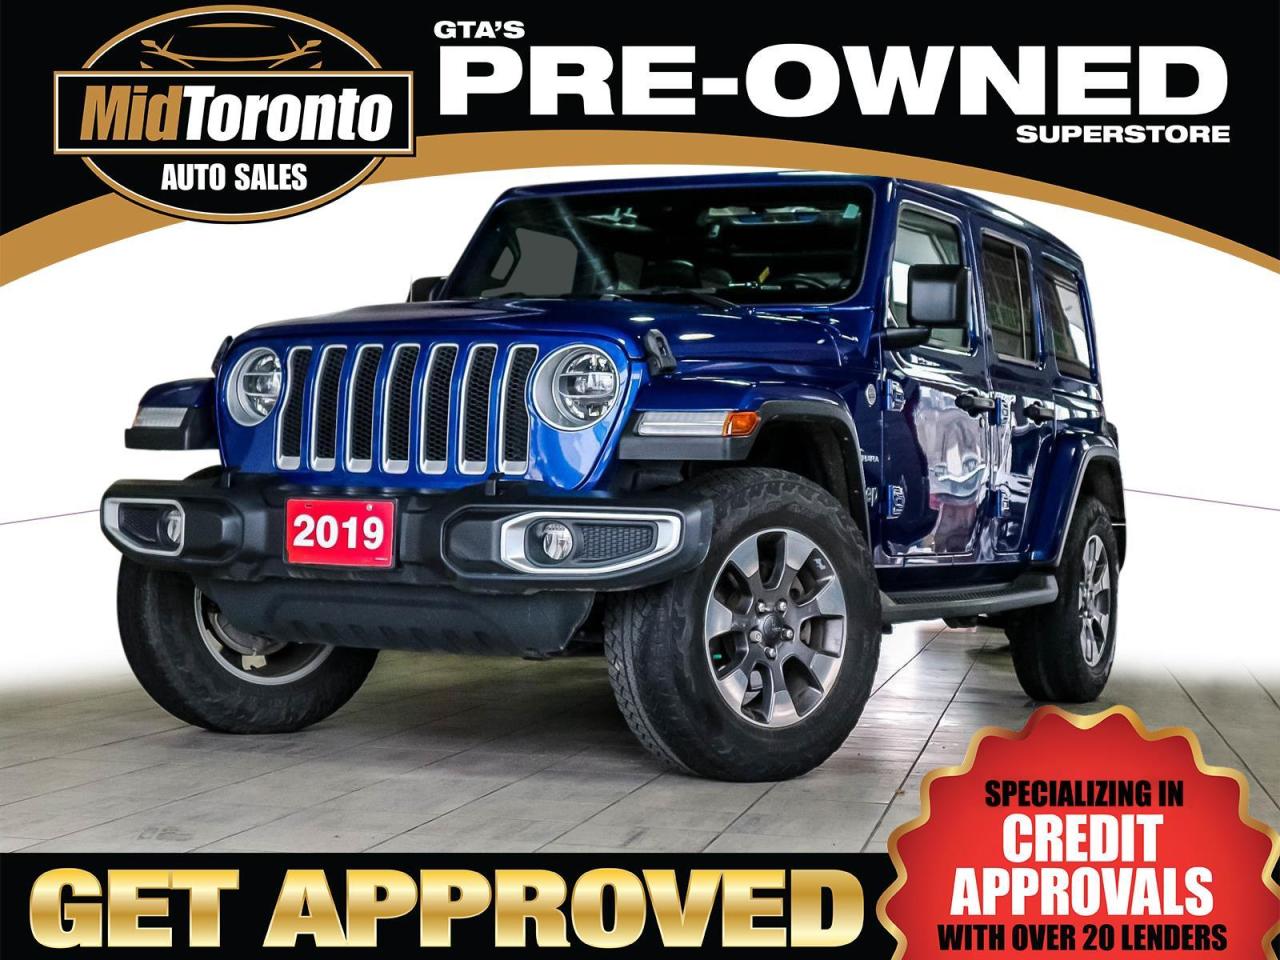 Used 2019 Jeep Wrangler Sahara - Loaded Compare - Power Sky Roof -  Navigation - Leather - No Accidents - Dealer Serviced for Sale in North  York, Ontario 